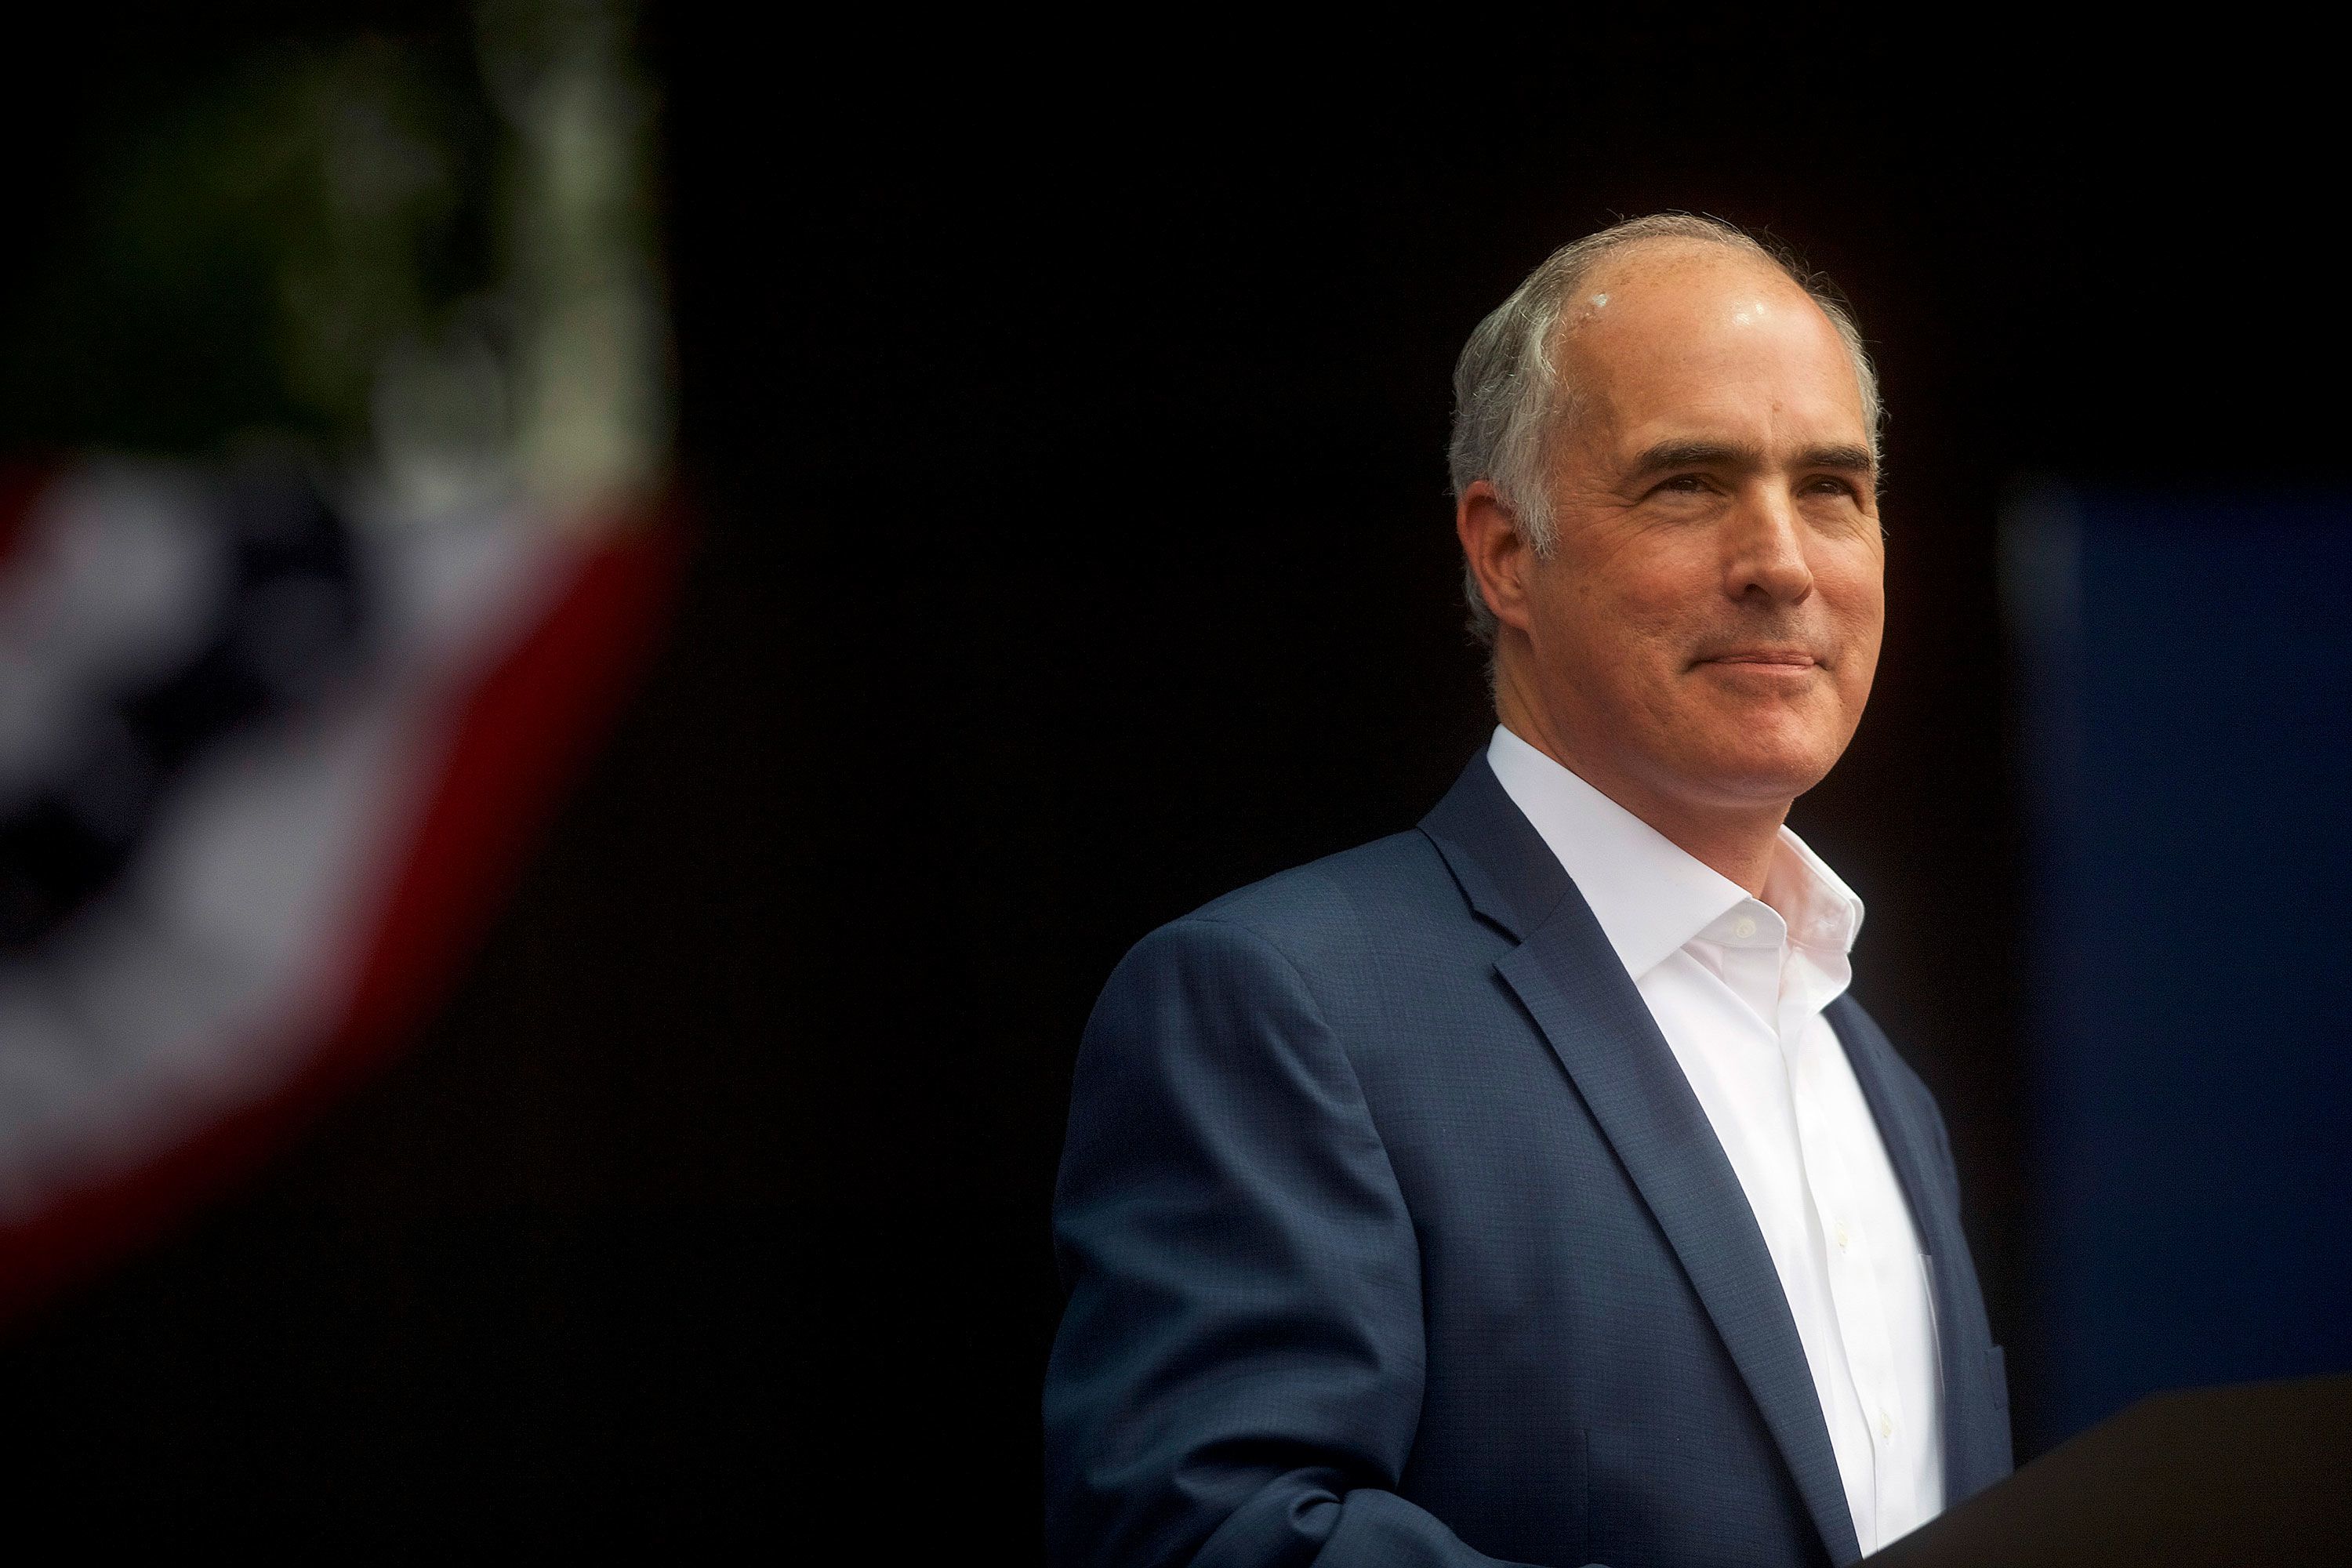 PHILADELPHIA, PA - SEPTEMBER 21:  Senator Bob Casey (D- PA) addresses supporters before former President Barack Obama speaks during a campaign rally for statewide Democratic candidates on September 21, 2018 in Philadelphia, Pennsylvania.  Midterm election day is November 6th.  (Photo by Mark Makela/Getty Images)